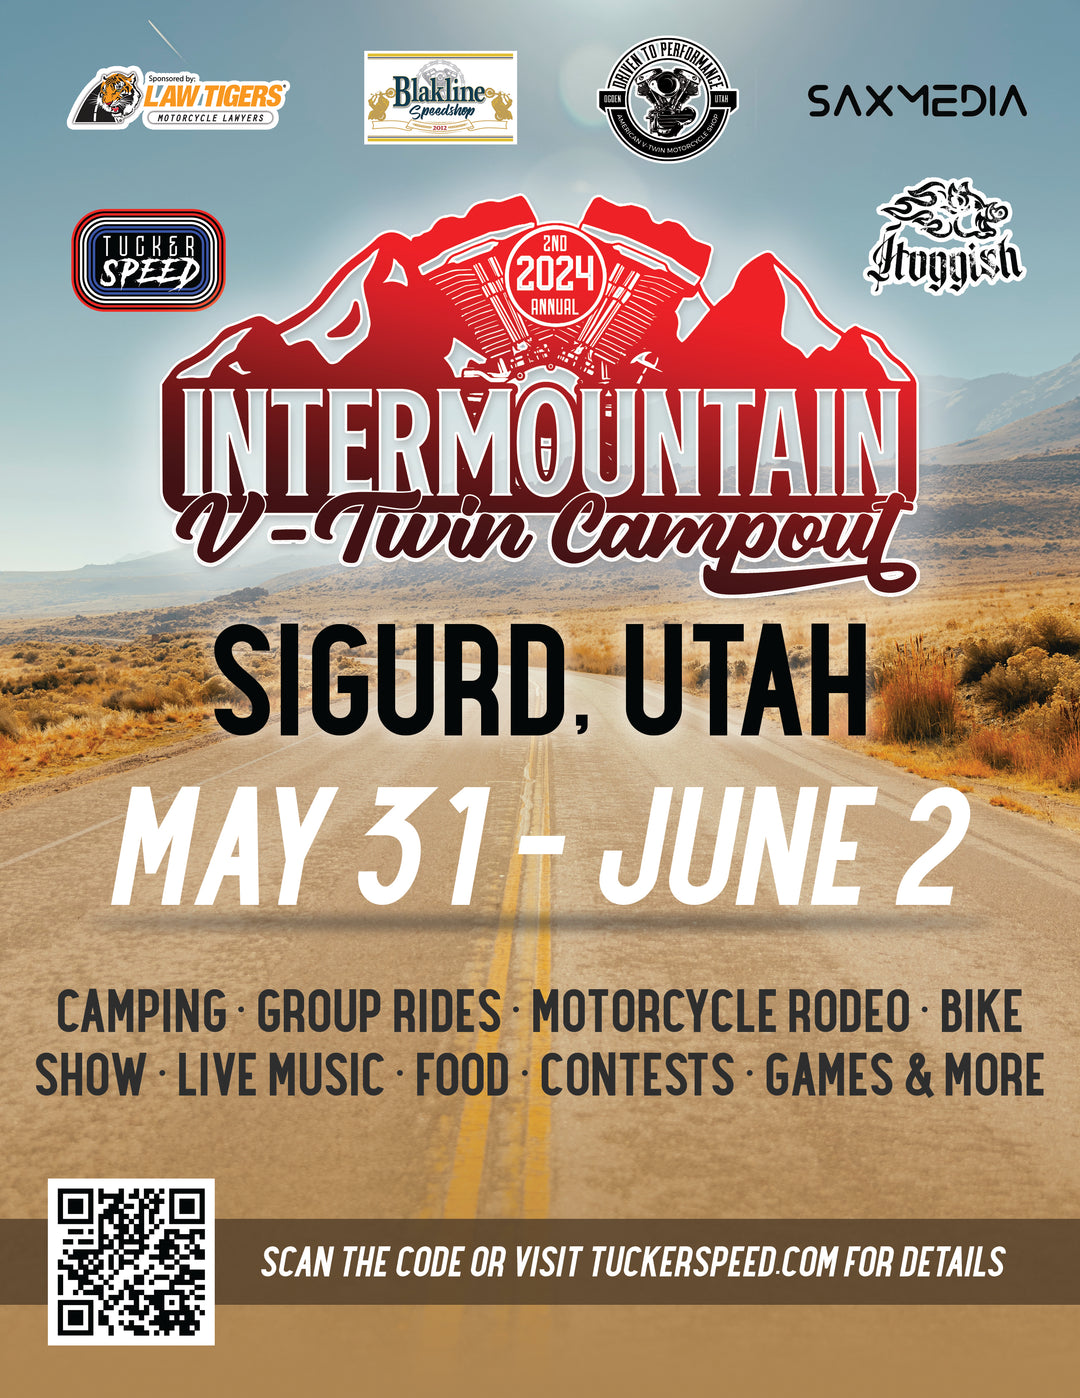 The 2nd Annual Intermountain V-Twin Campout!